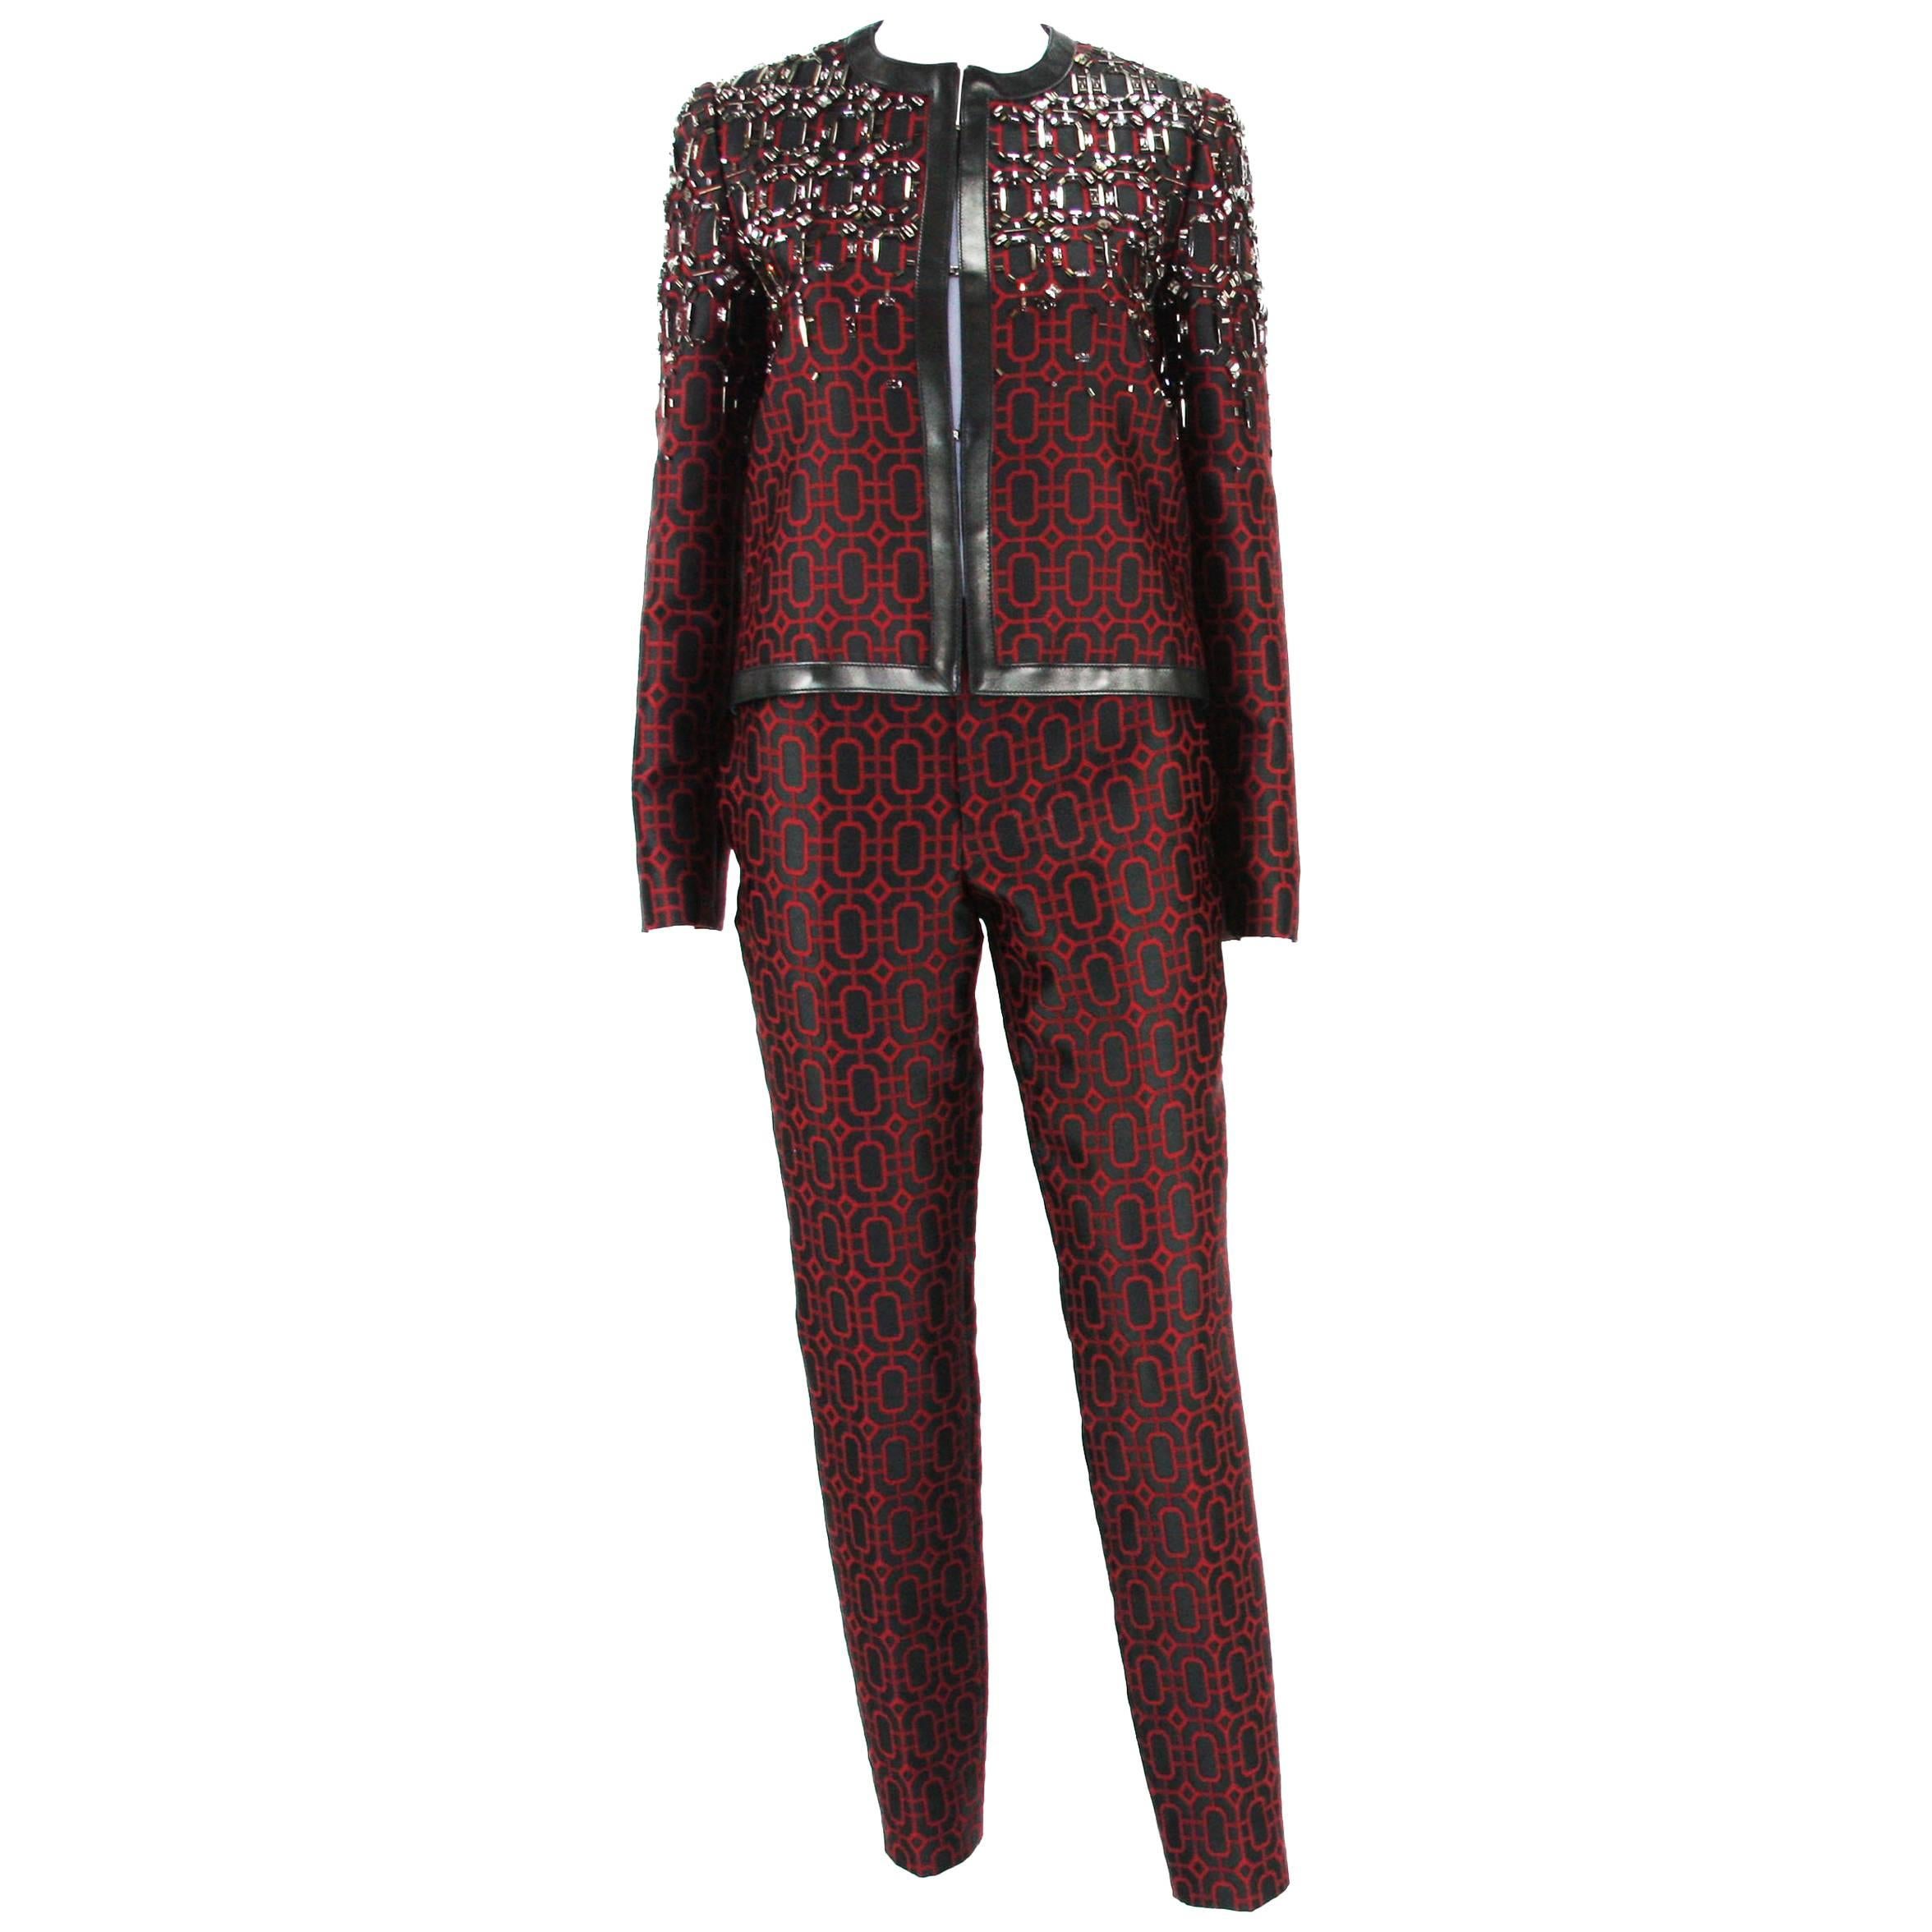 New Gucci Beaded Embellished Black Burgundy Pant Suit It. 40 - US 4/6 For Sale